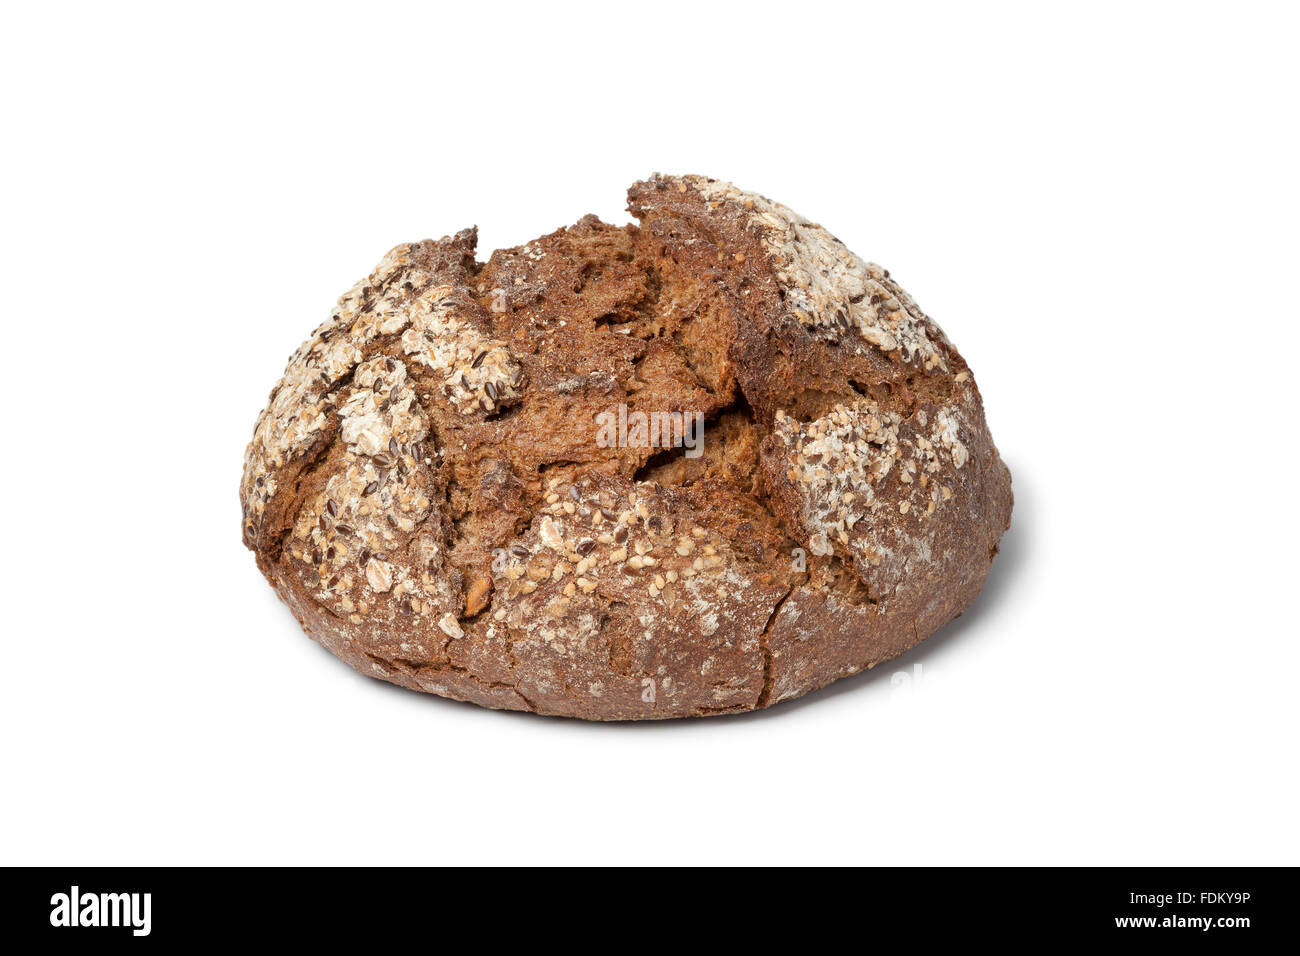 Loaf of fresh multi grain farmers bread on white background Stock Photo